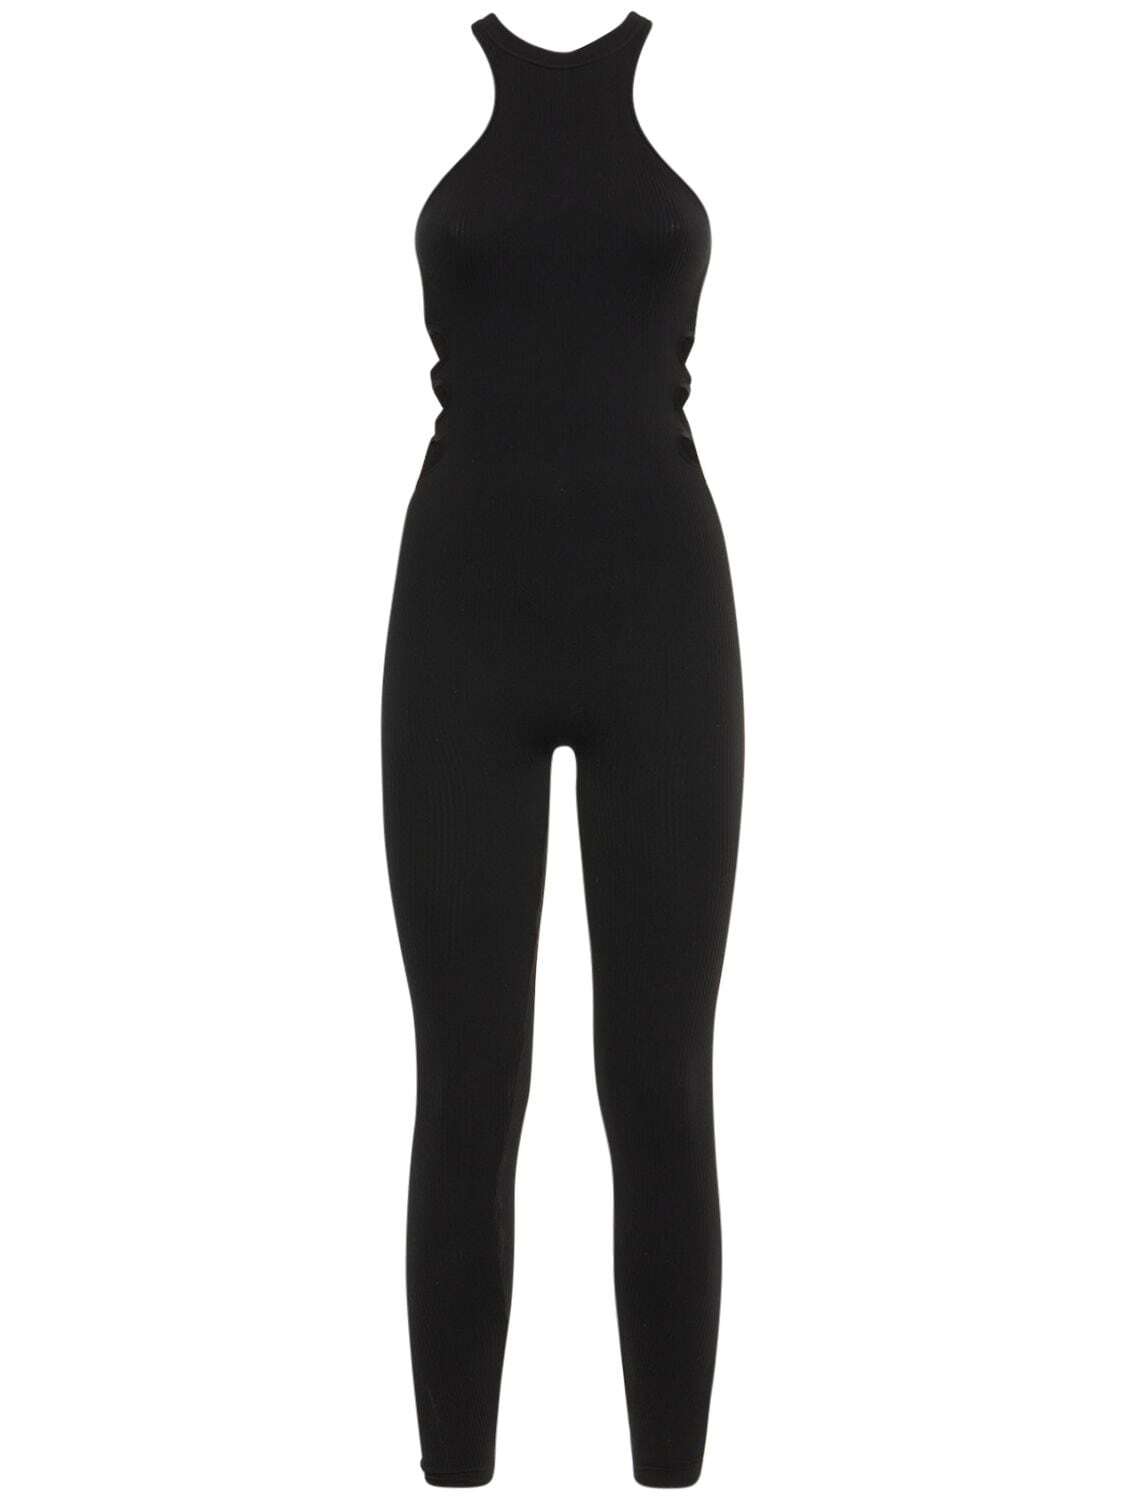 ANDREADAMO Ribbed Jersey Jumpsuit W/cut Out in black